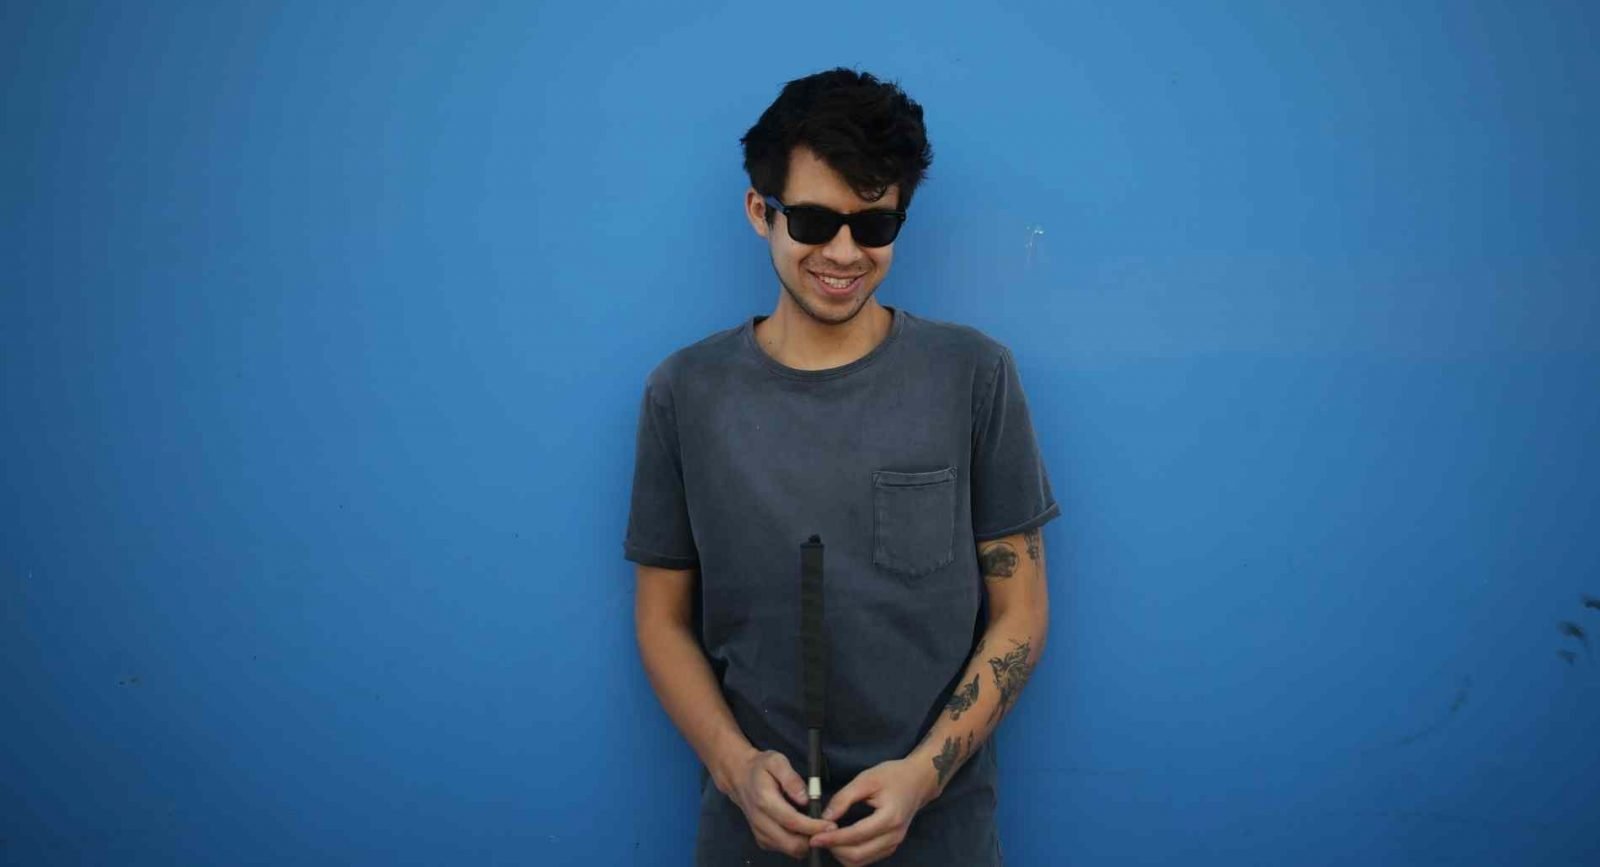 Gustavo stands with a can and dark sunglasses in a grey shirt before a blue background.